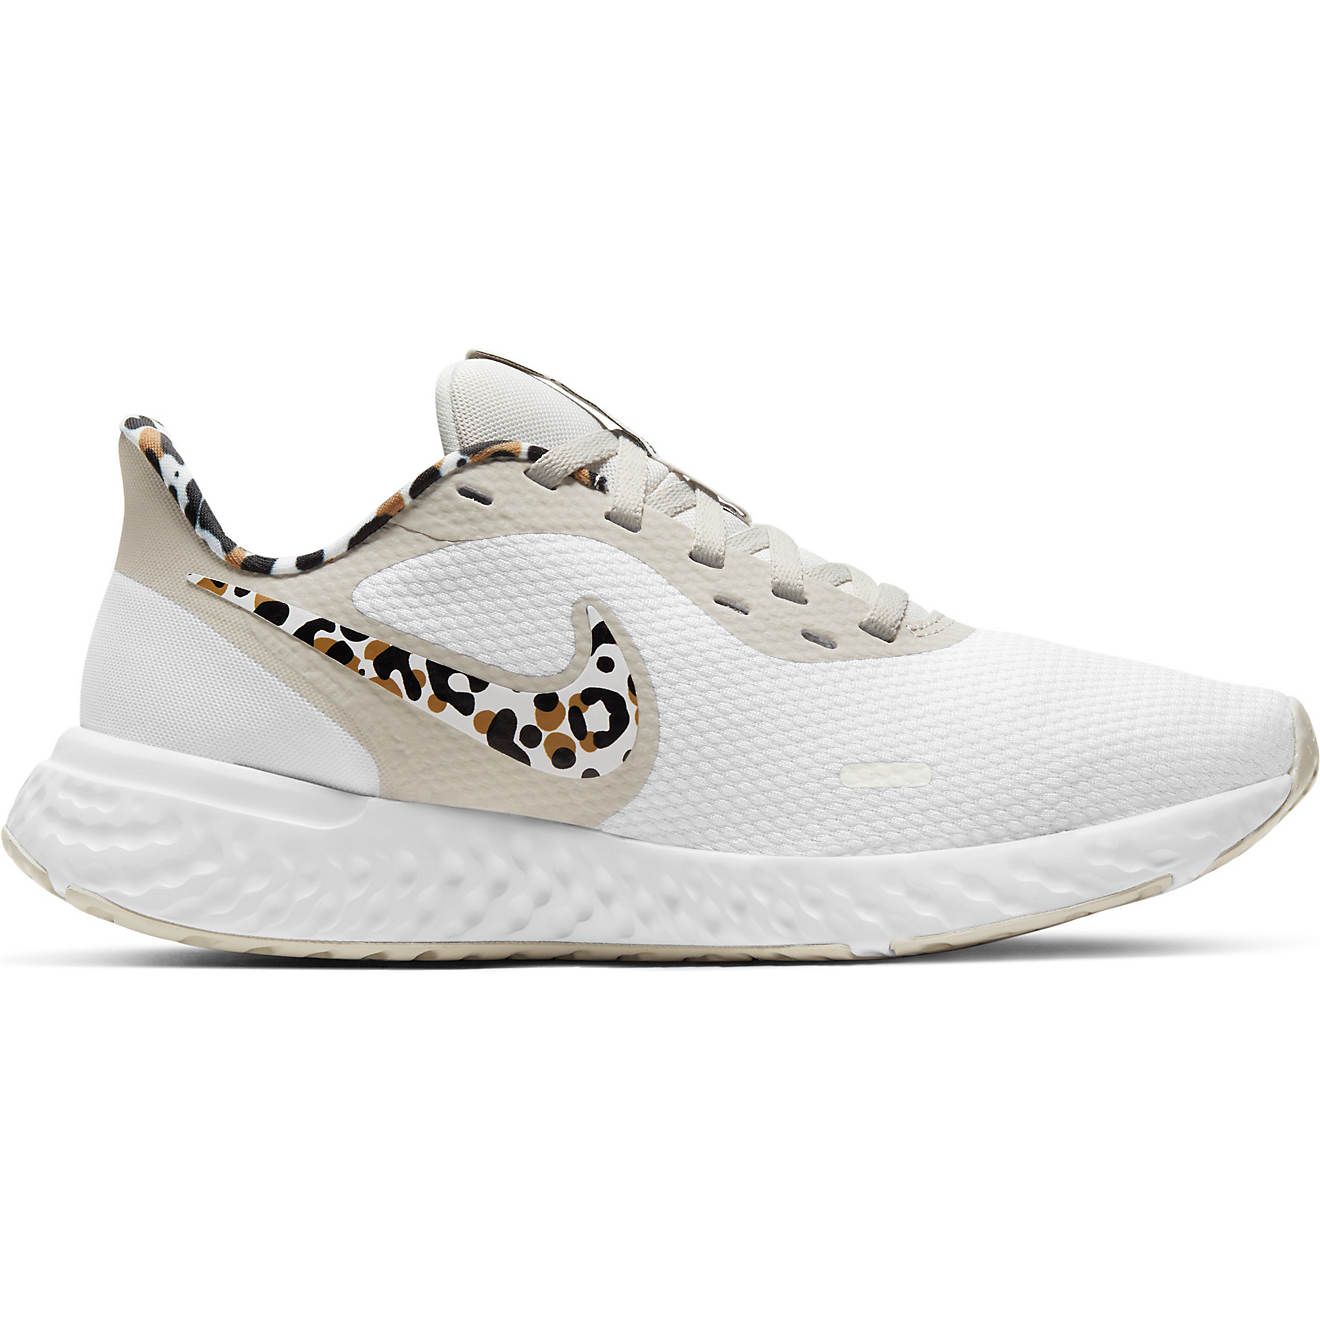 Nike Women's Revolution 5 Leopard Running Shoes | Academy Sports + Outdoor Affiliate